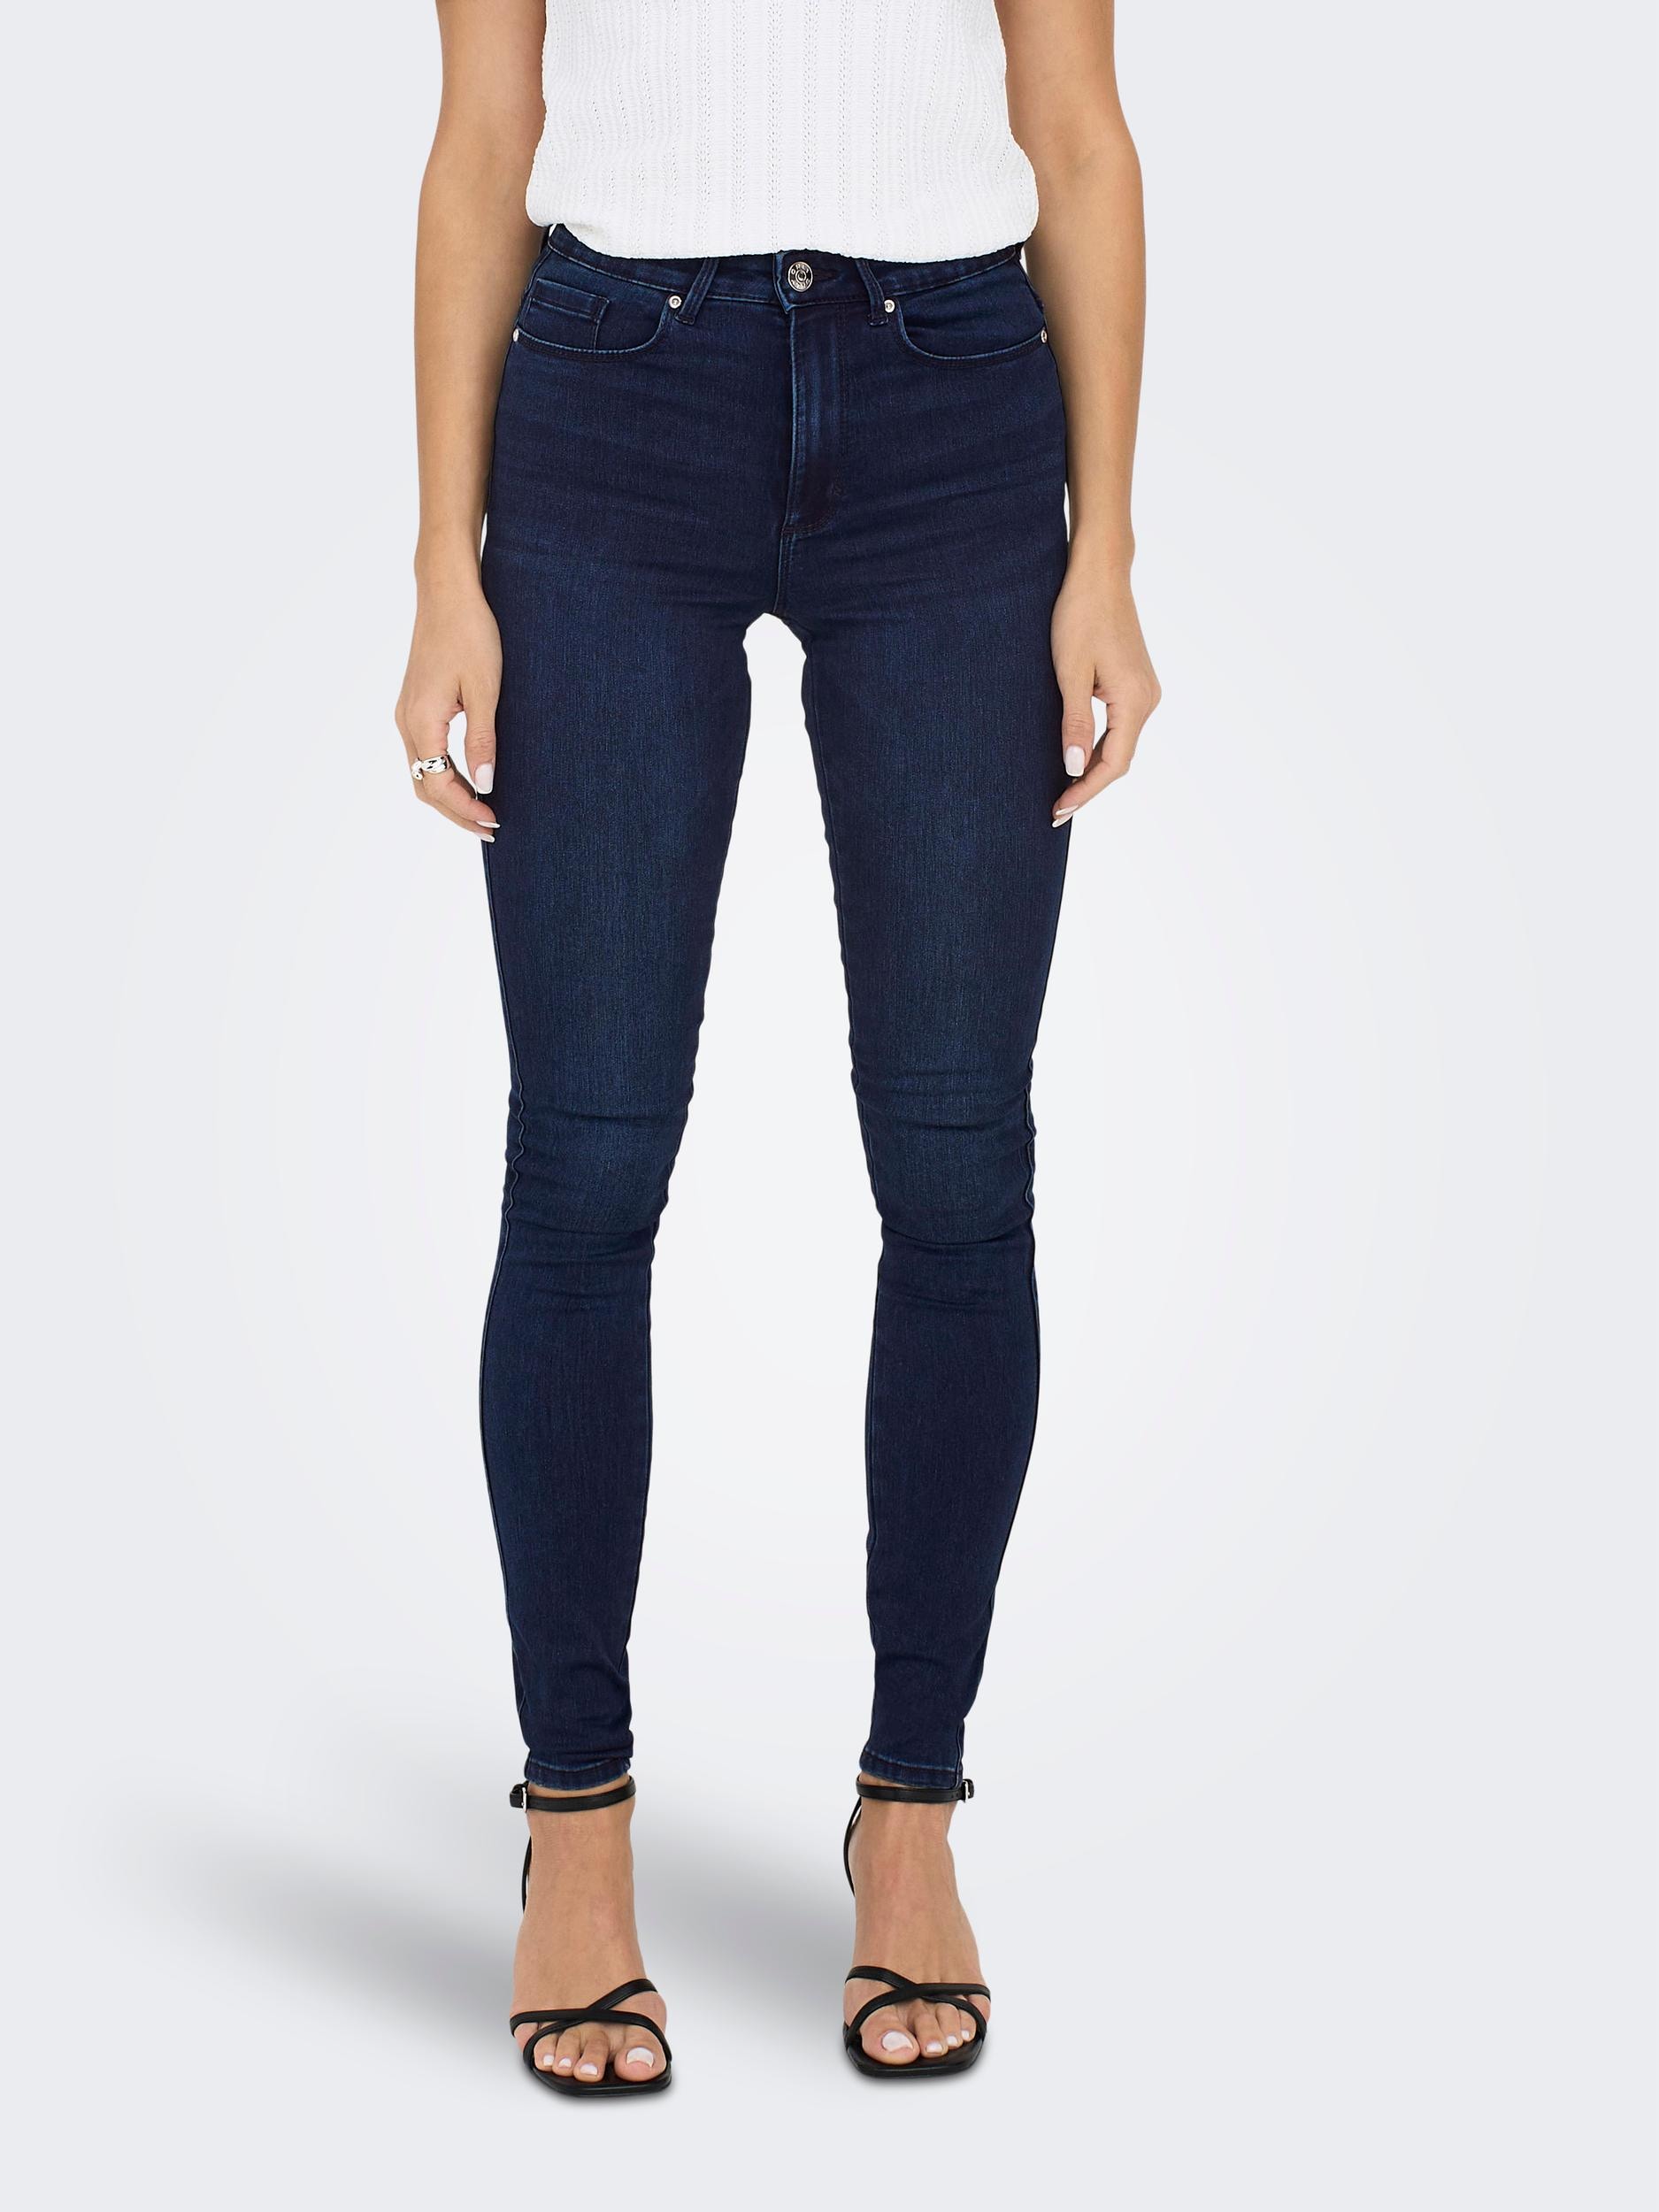 ONLY High-waist-Jeans »ONLROYAL HW SKINNY P...